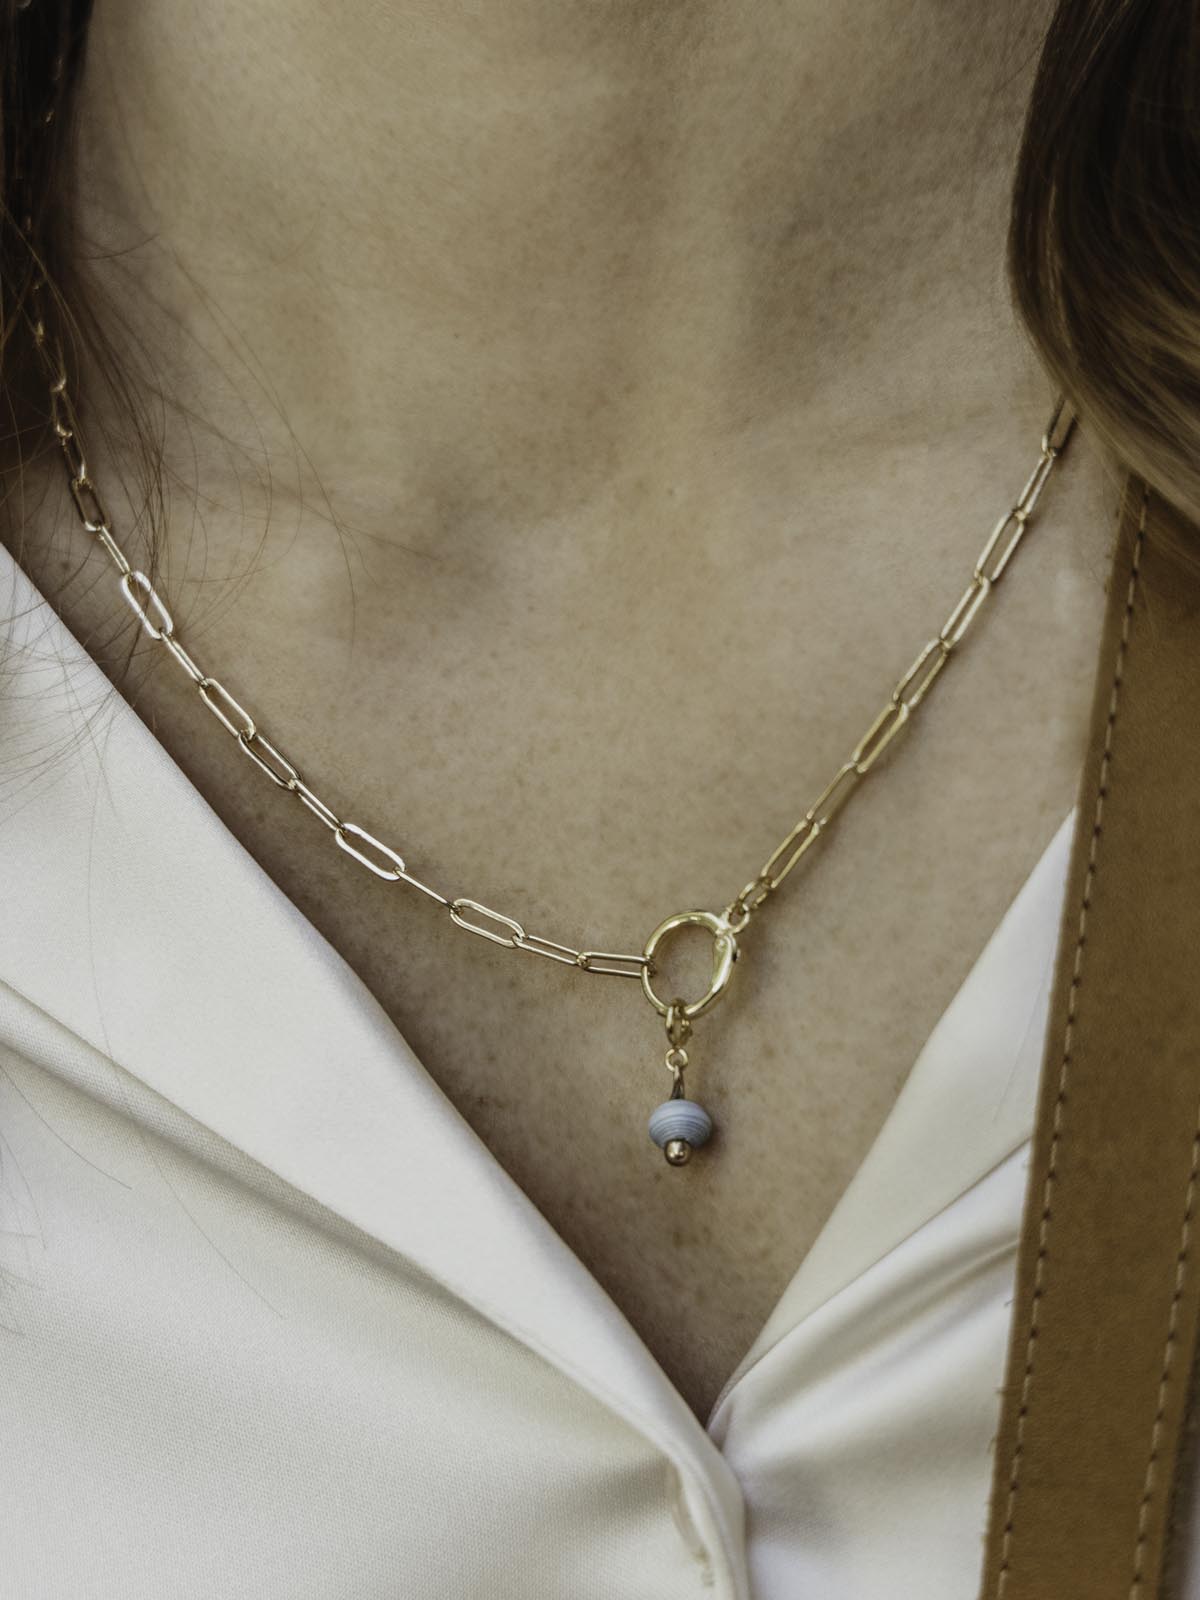 Gold Chain necklace on model with a featured light blue birthstone bead.